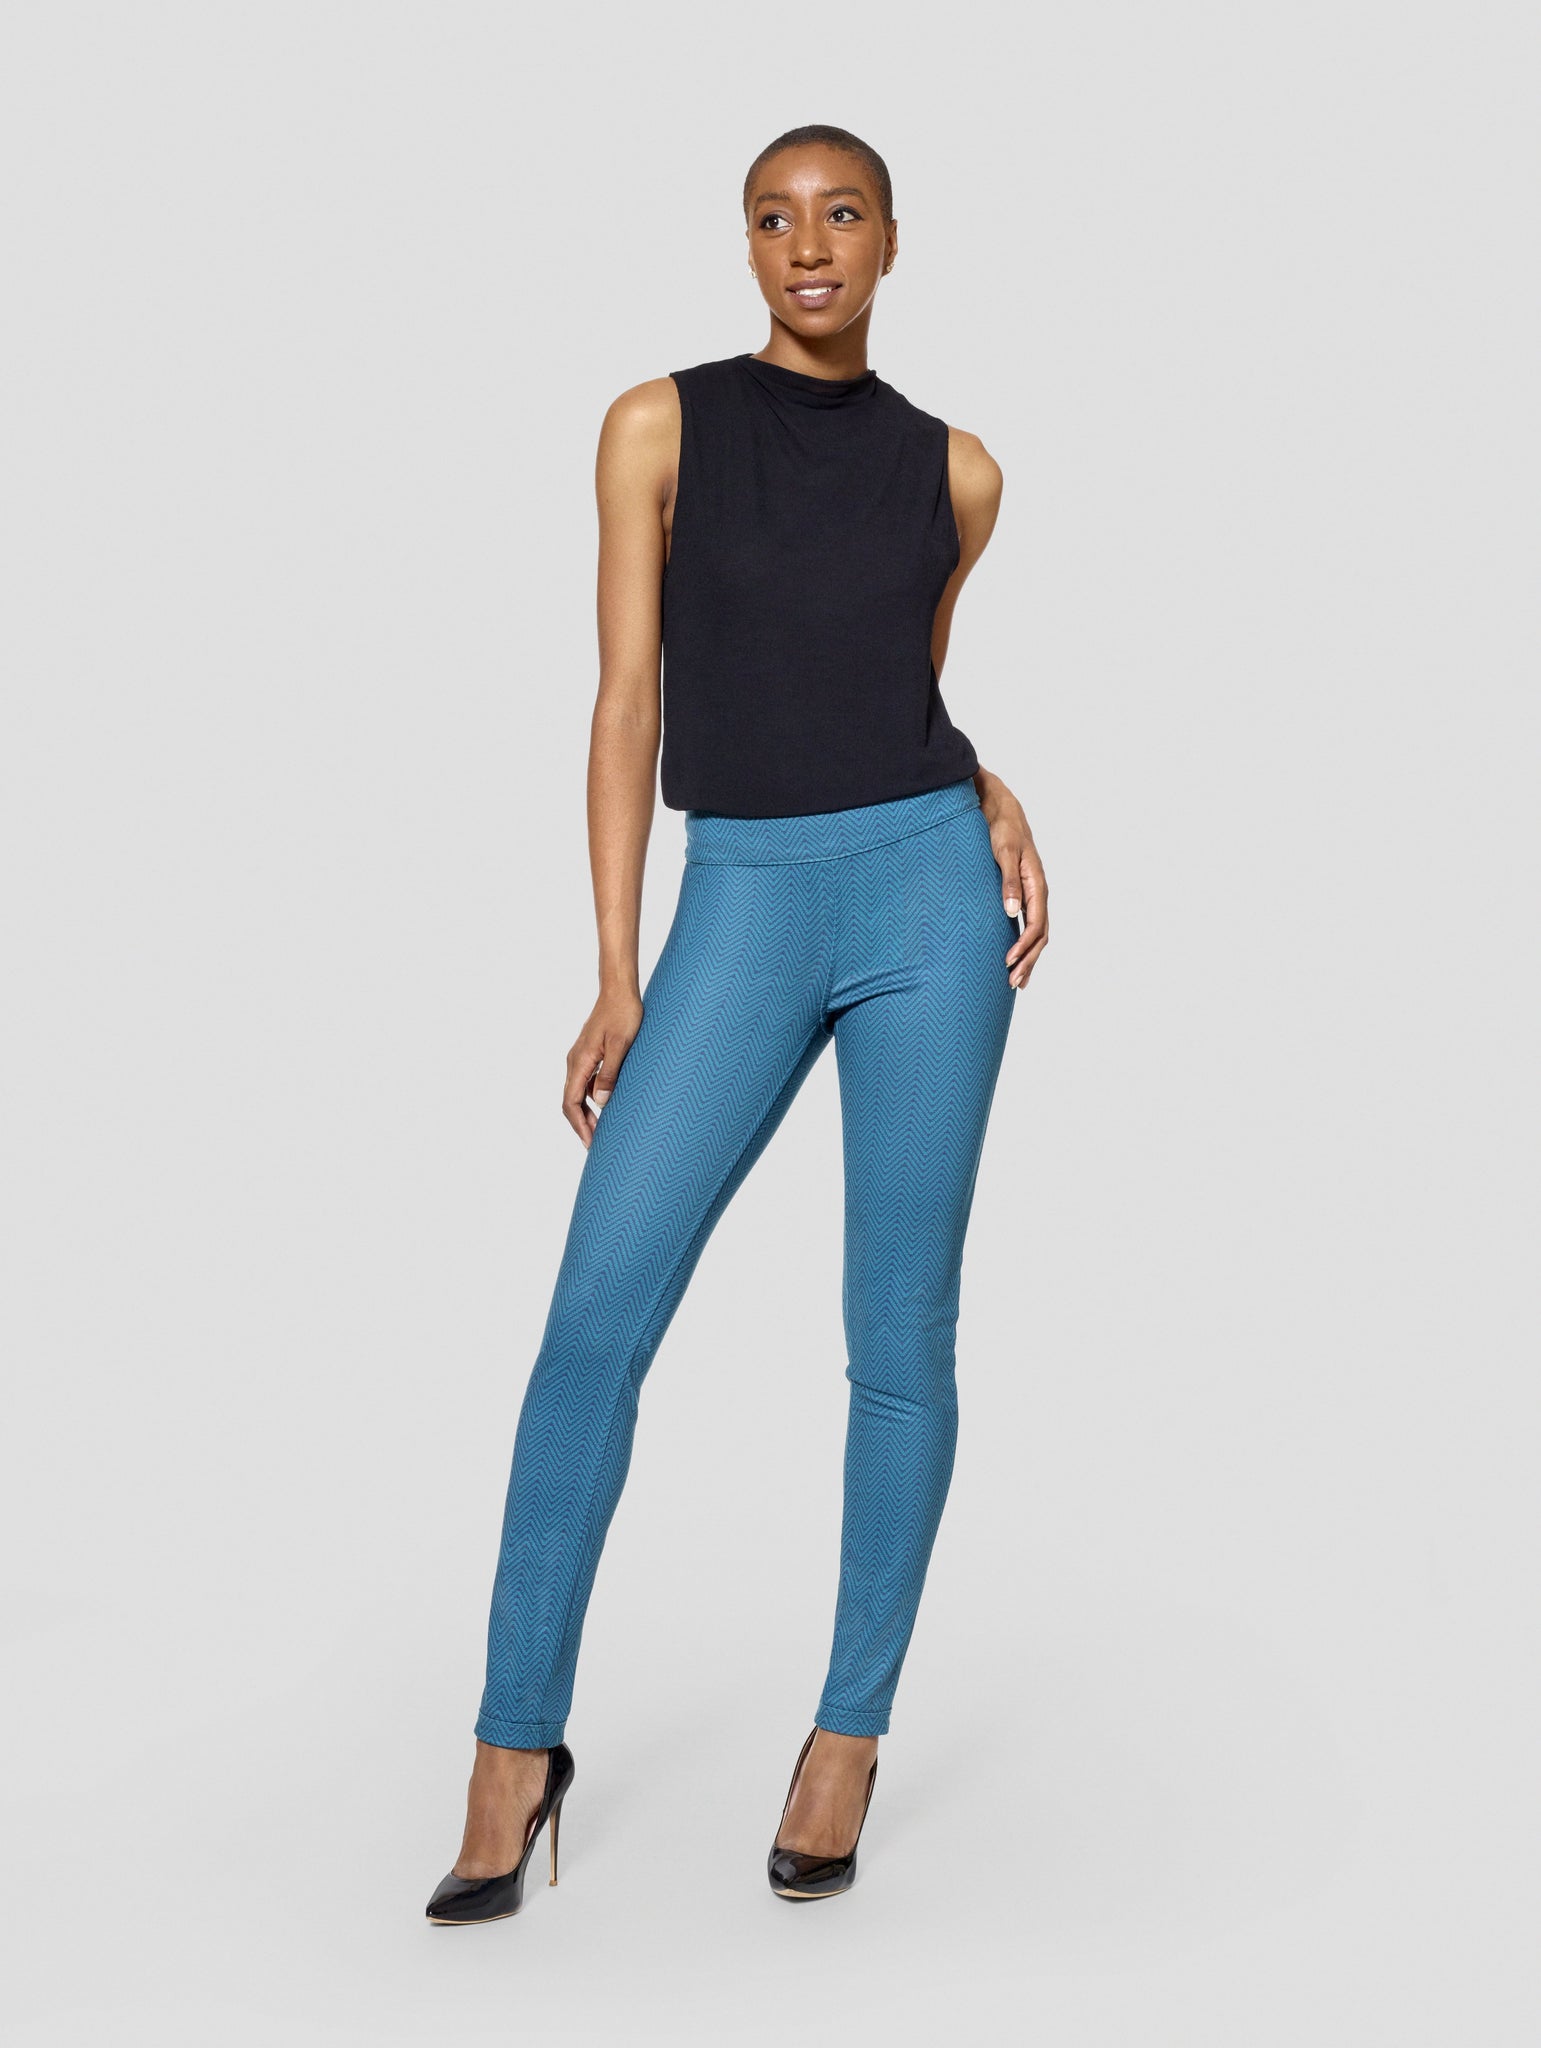 LTS Tall Women's Cobalt Blue Tapered Trousers